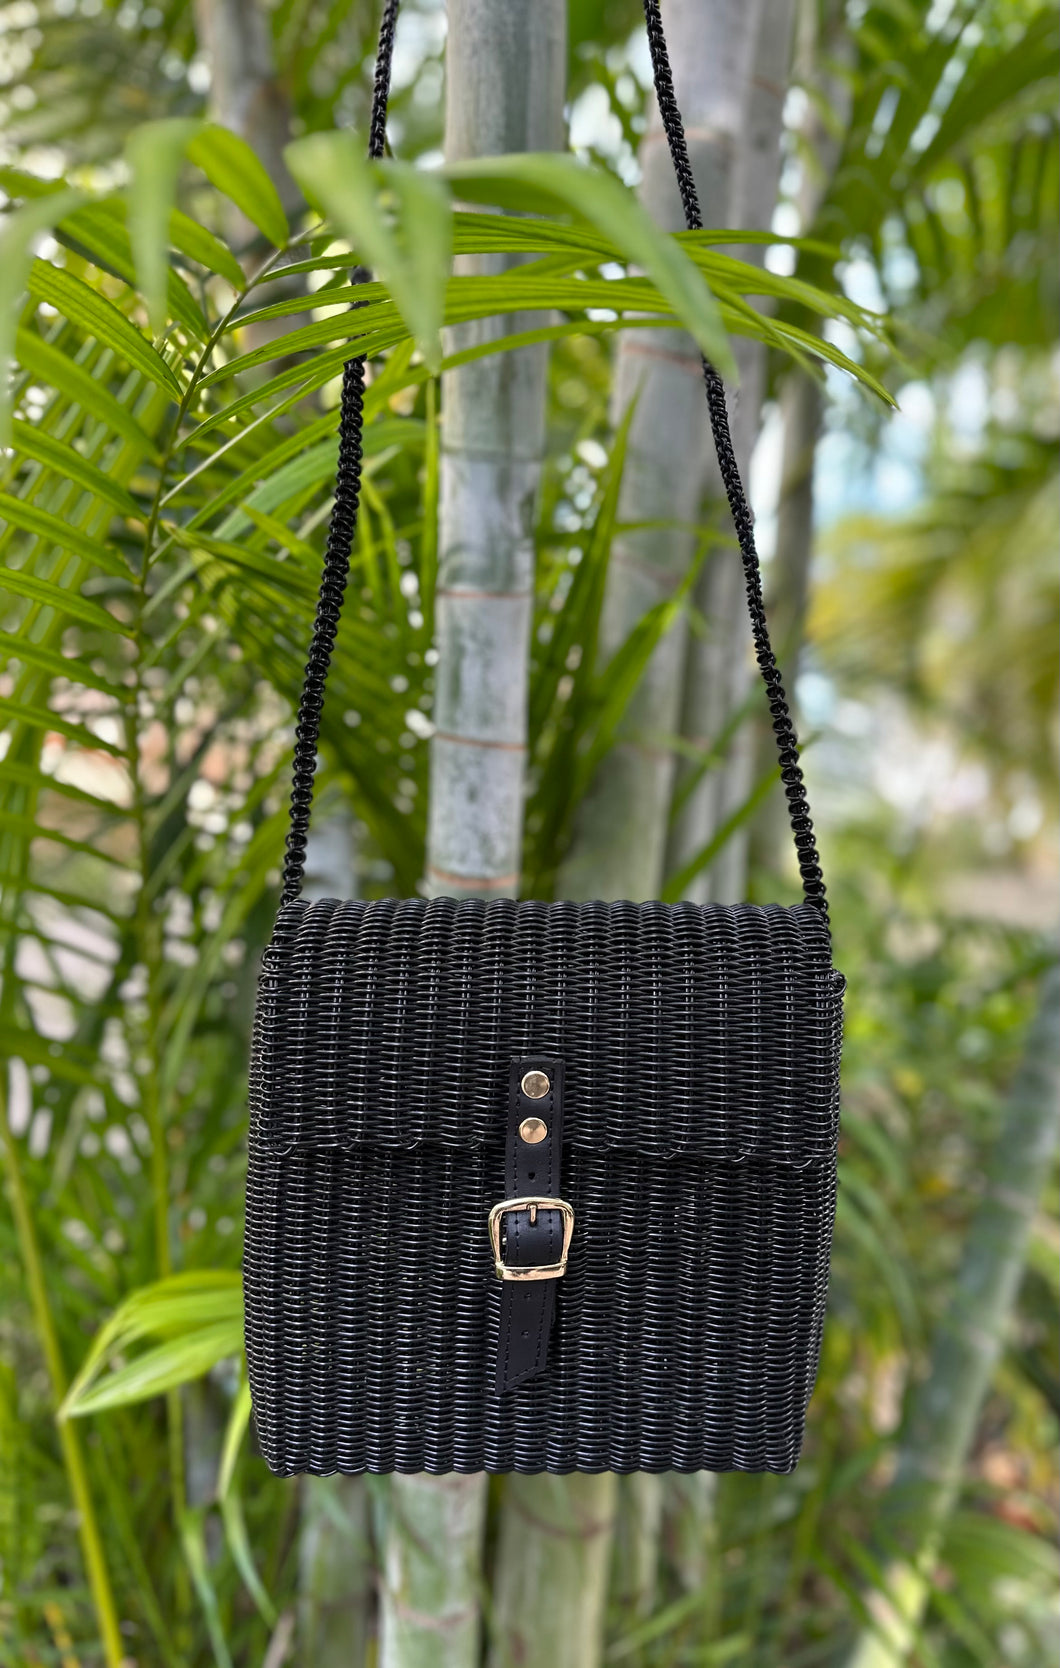 New Medium Black Crossbody With  Real Leather Black Strap & Magnetic Snap Closure.